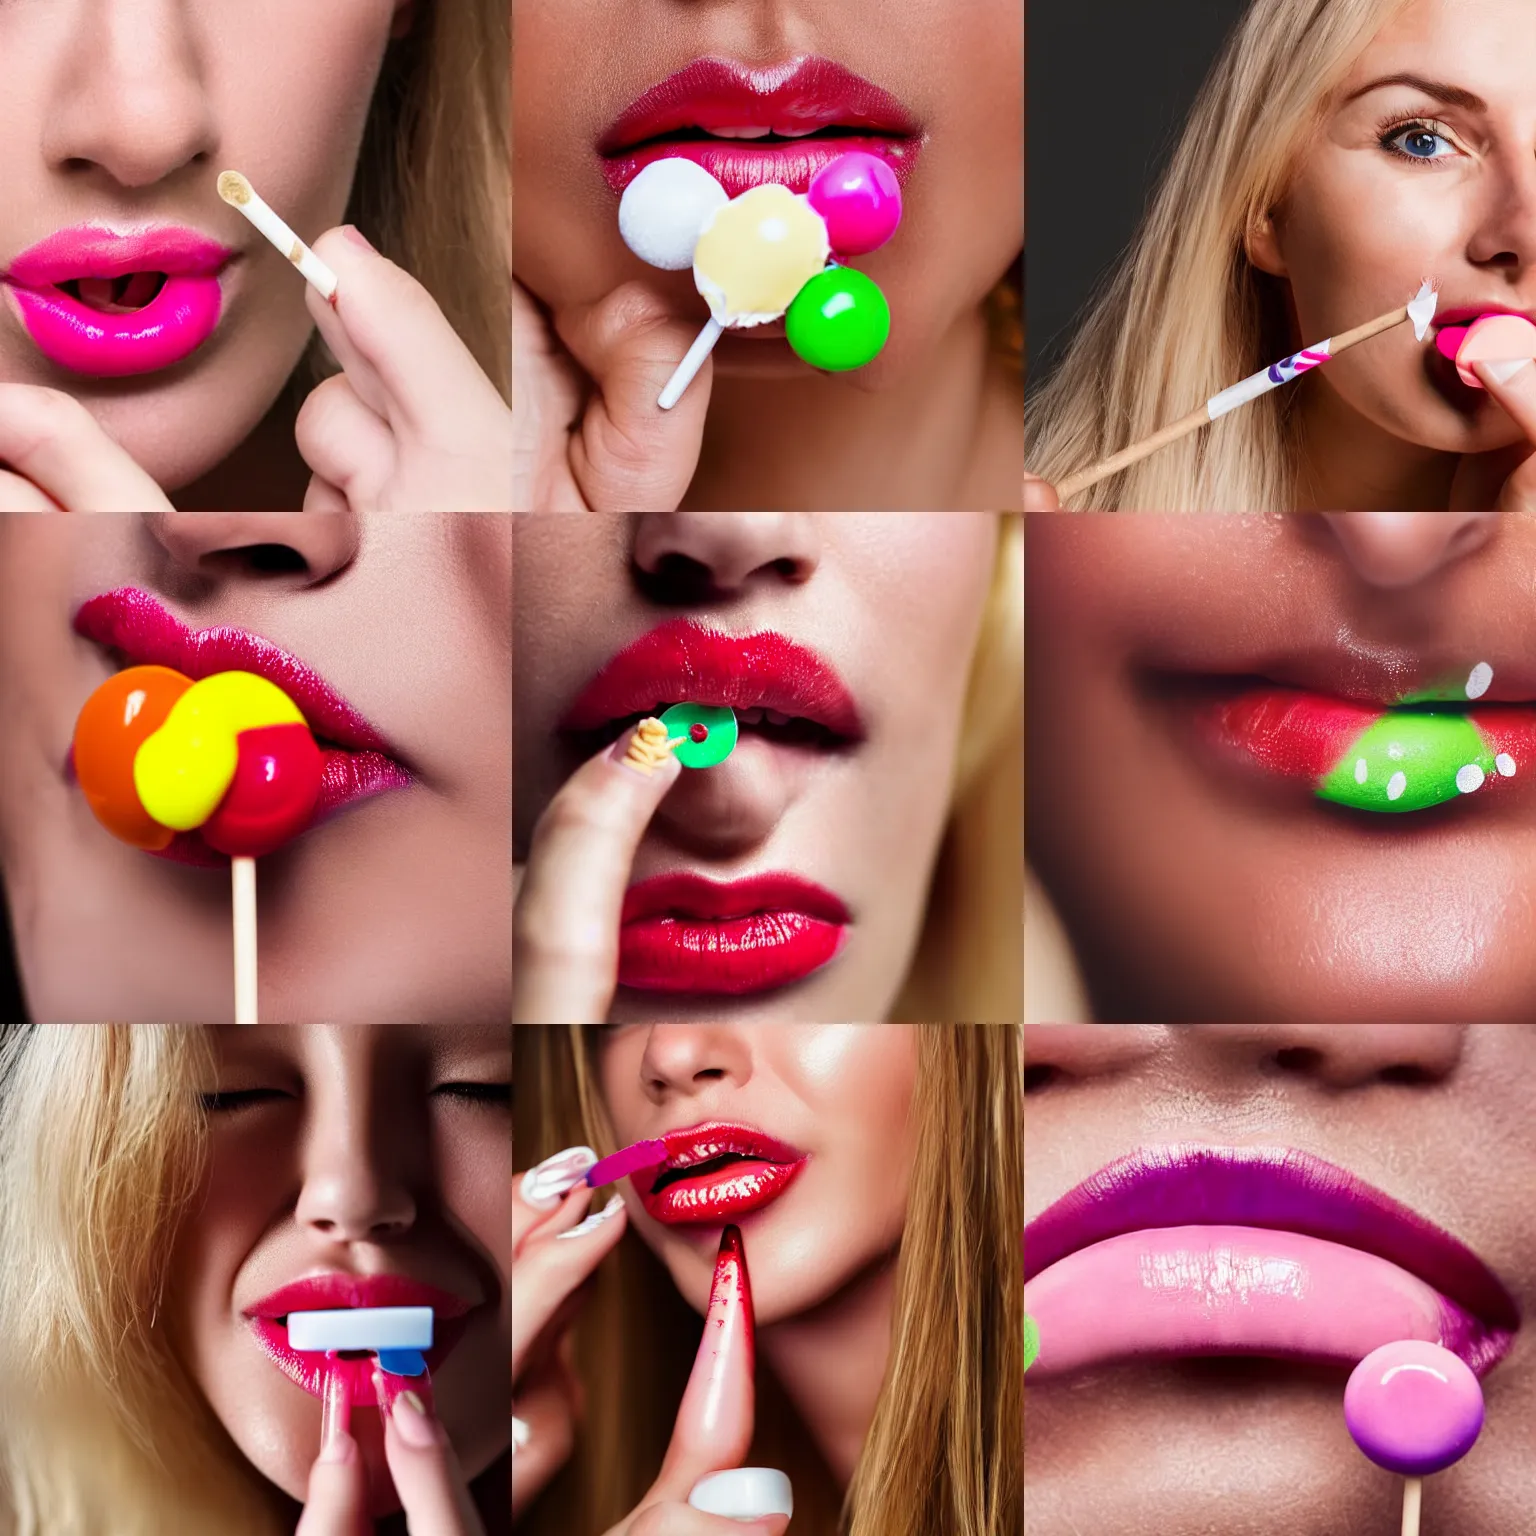 Prompt: a blonde woman with a lollipop against her lips, extreme close up, commercial photography